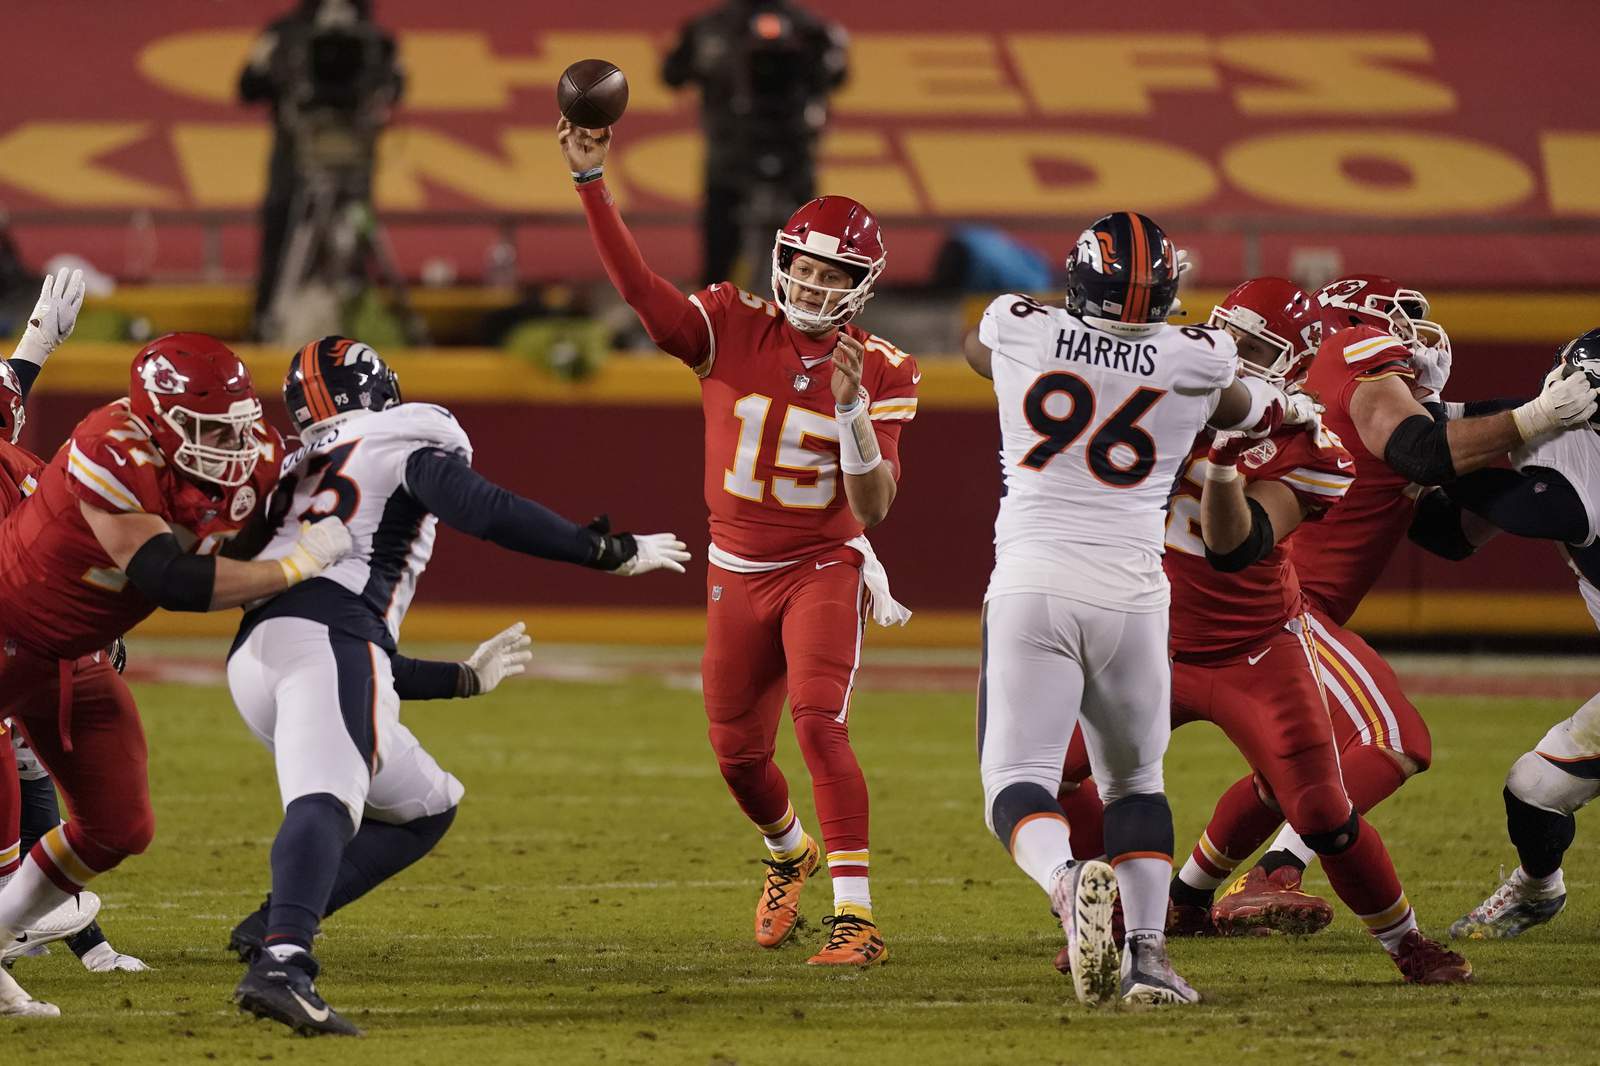 Chiefs rally to beat Broncos 22-16 to clinch playoff berth